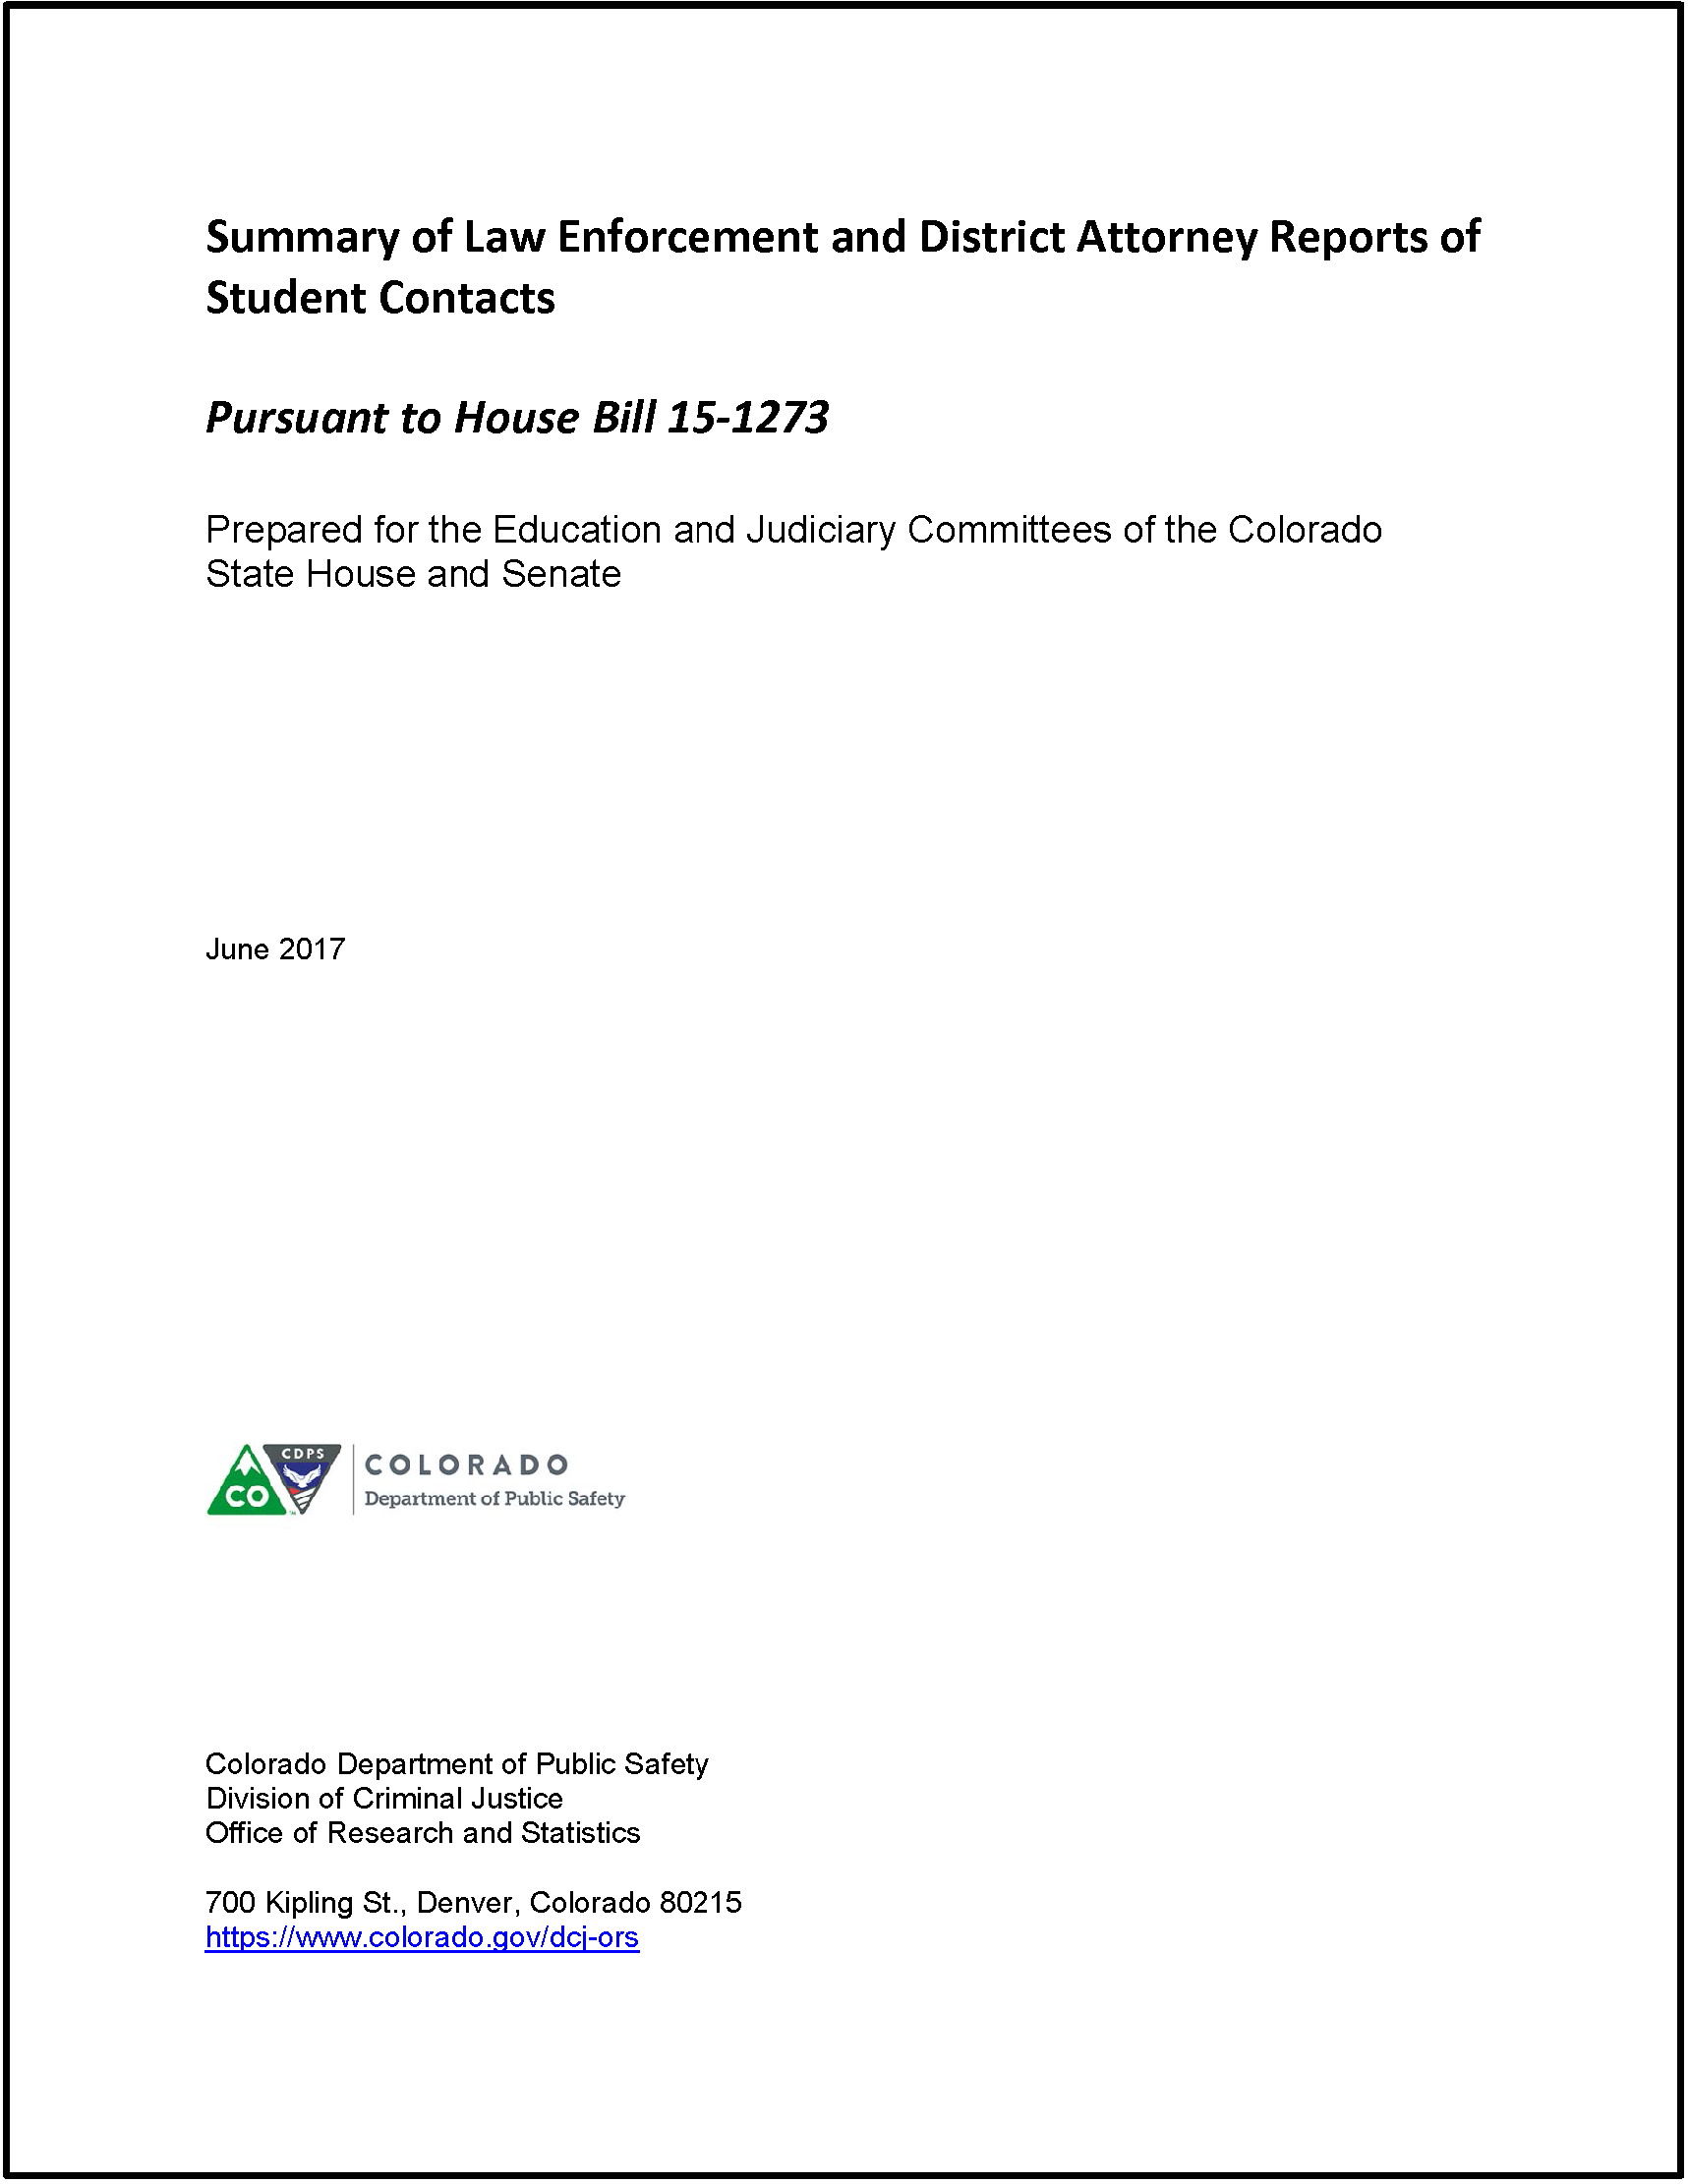 Summary of Law Enforcement and District Attorney Reports of Student Contacts (June 2017)